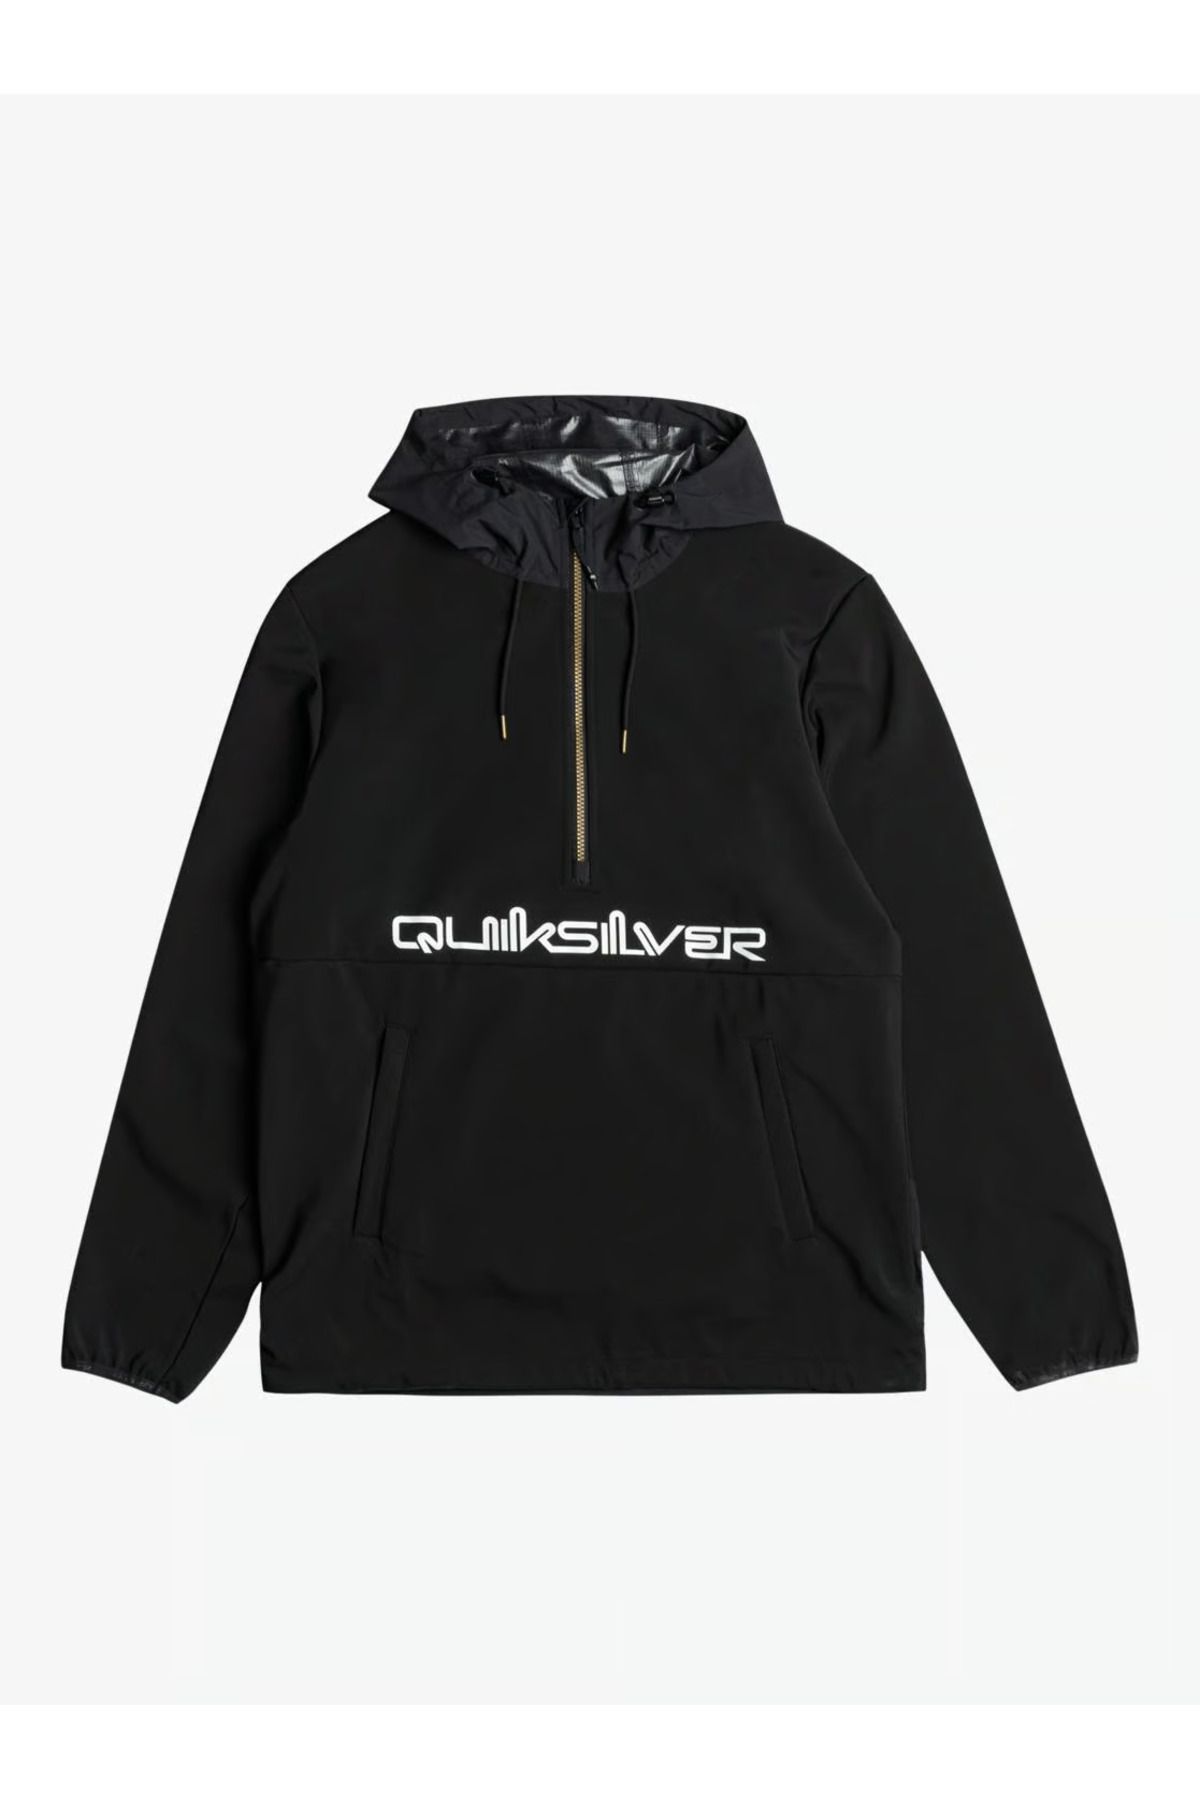 Quiksilver Live For The Ride